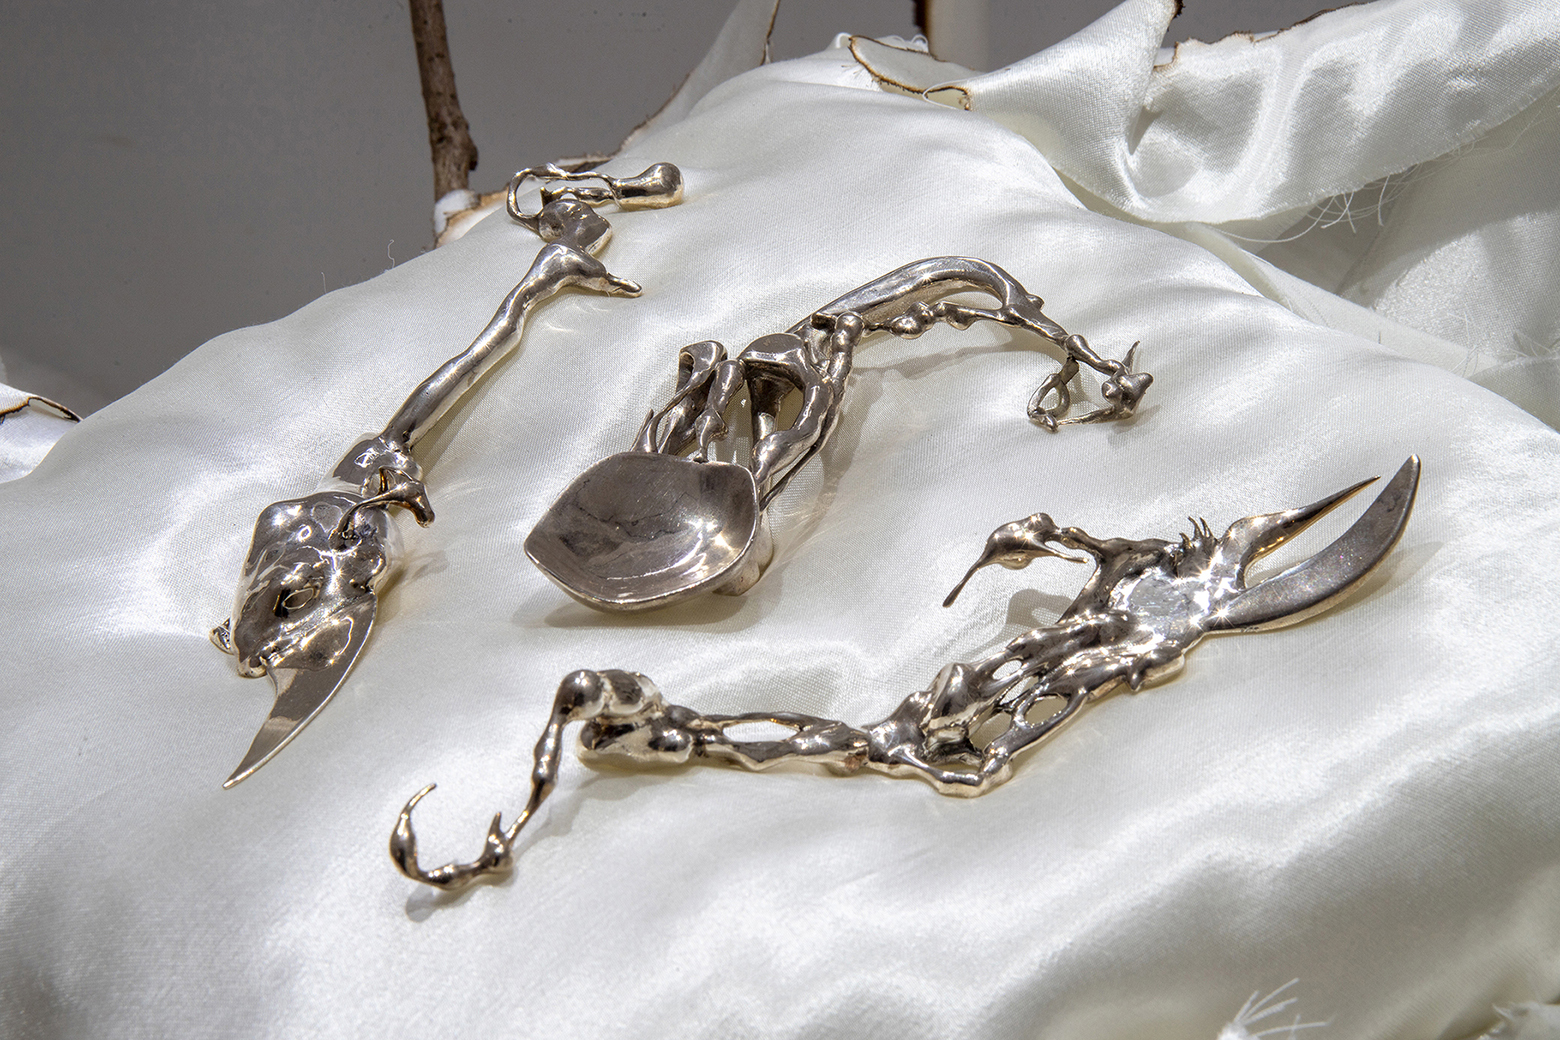 Detail of Katya Ohii, The buffet of the Odd, Argento sterling, 13x8x4 cm, 2023